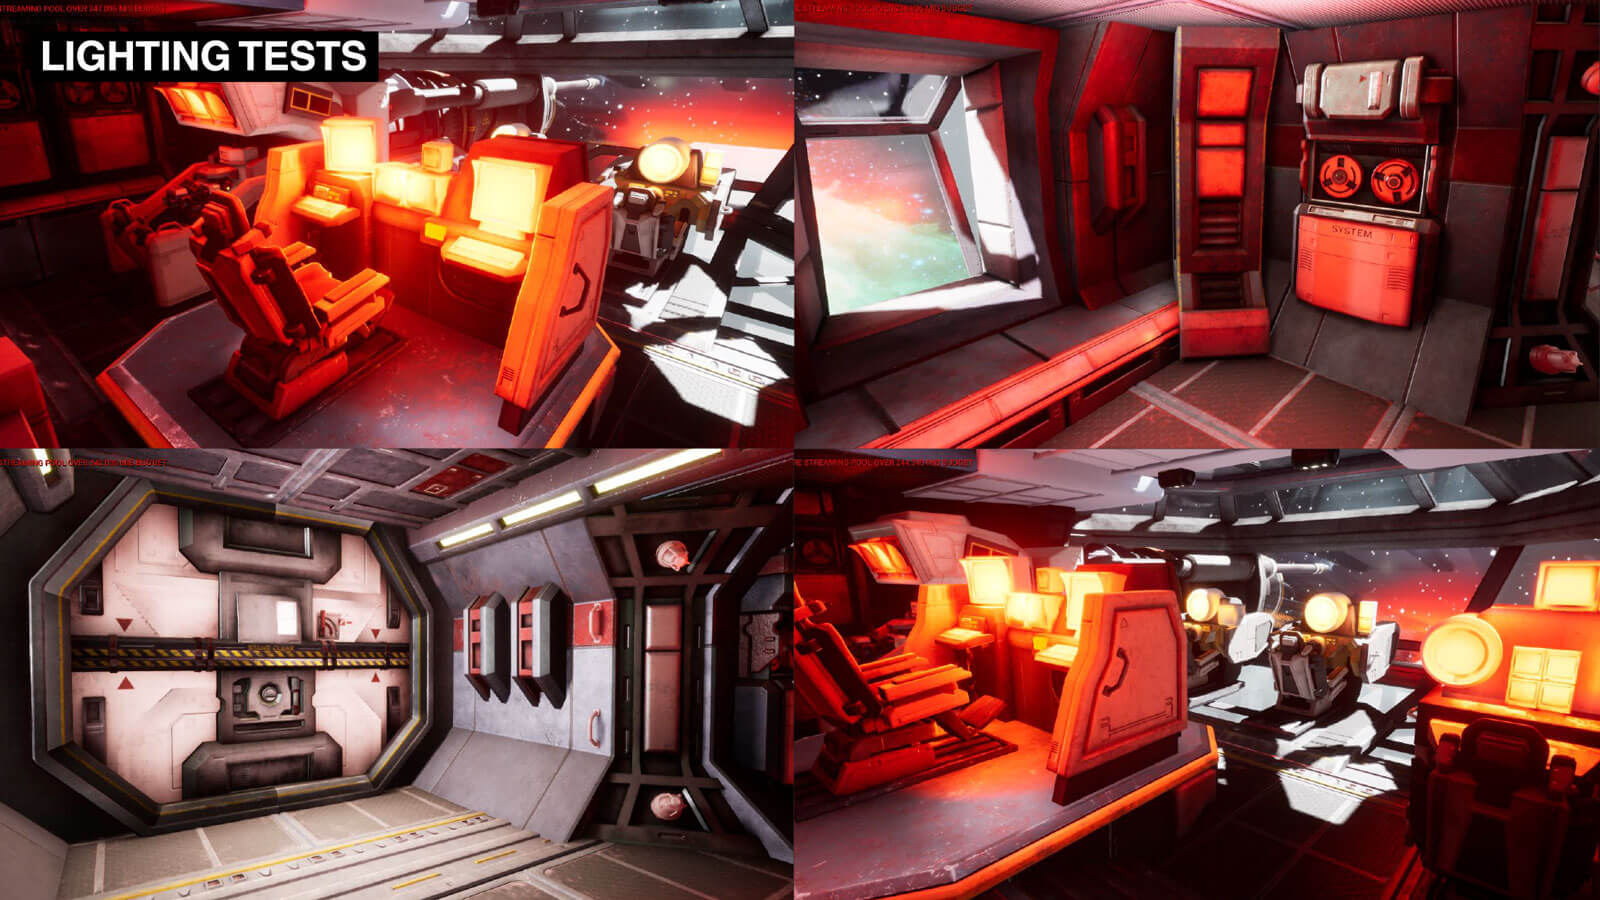 Four different camera angle views of the cockpit area demonstrating the game engine lighting